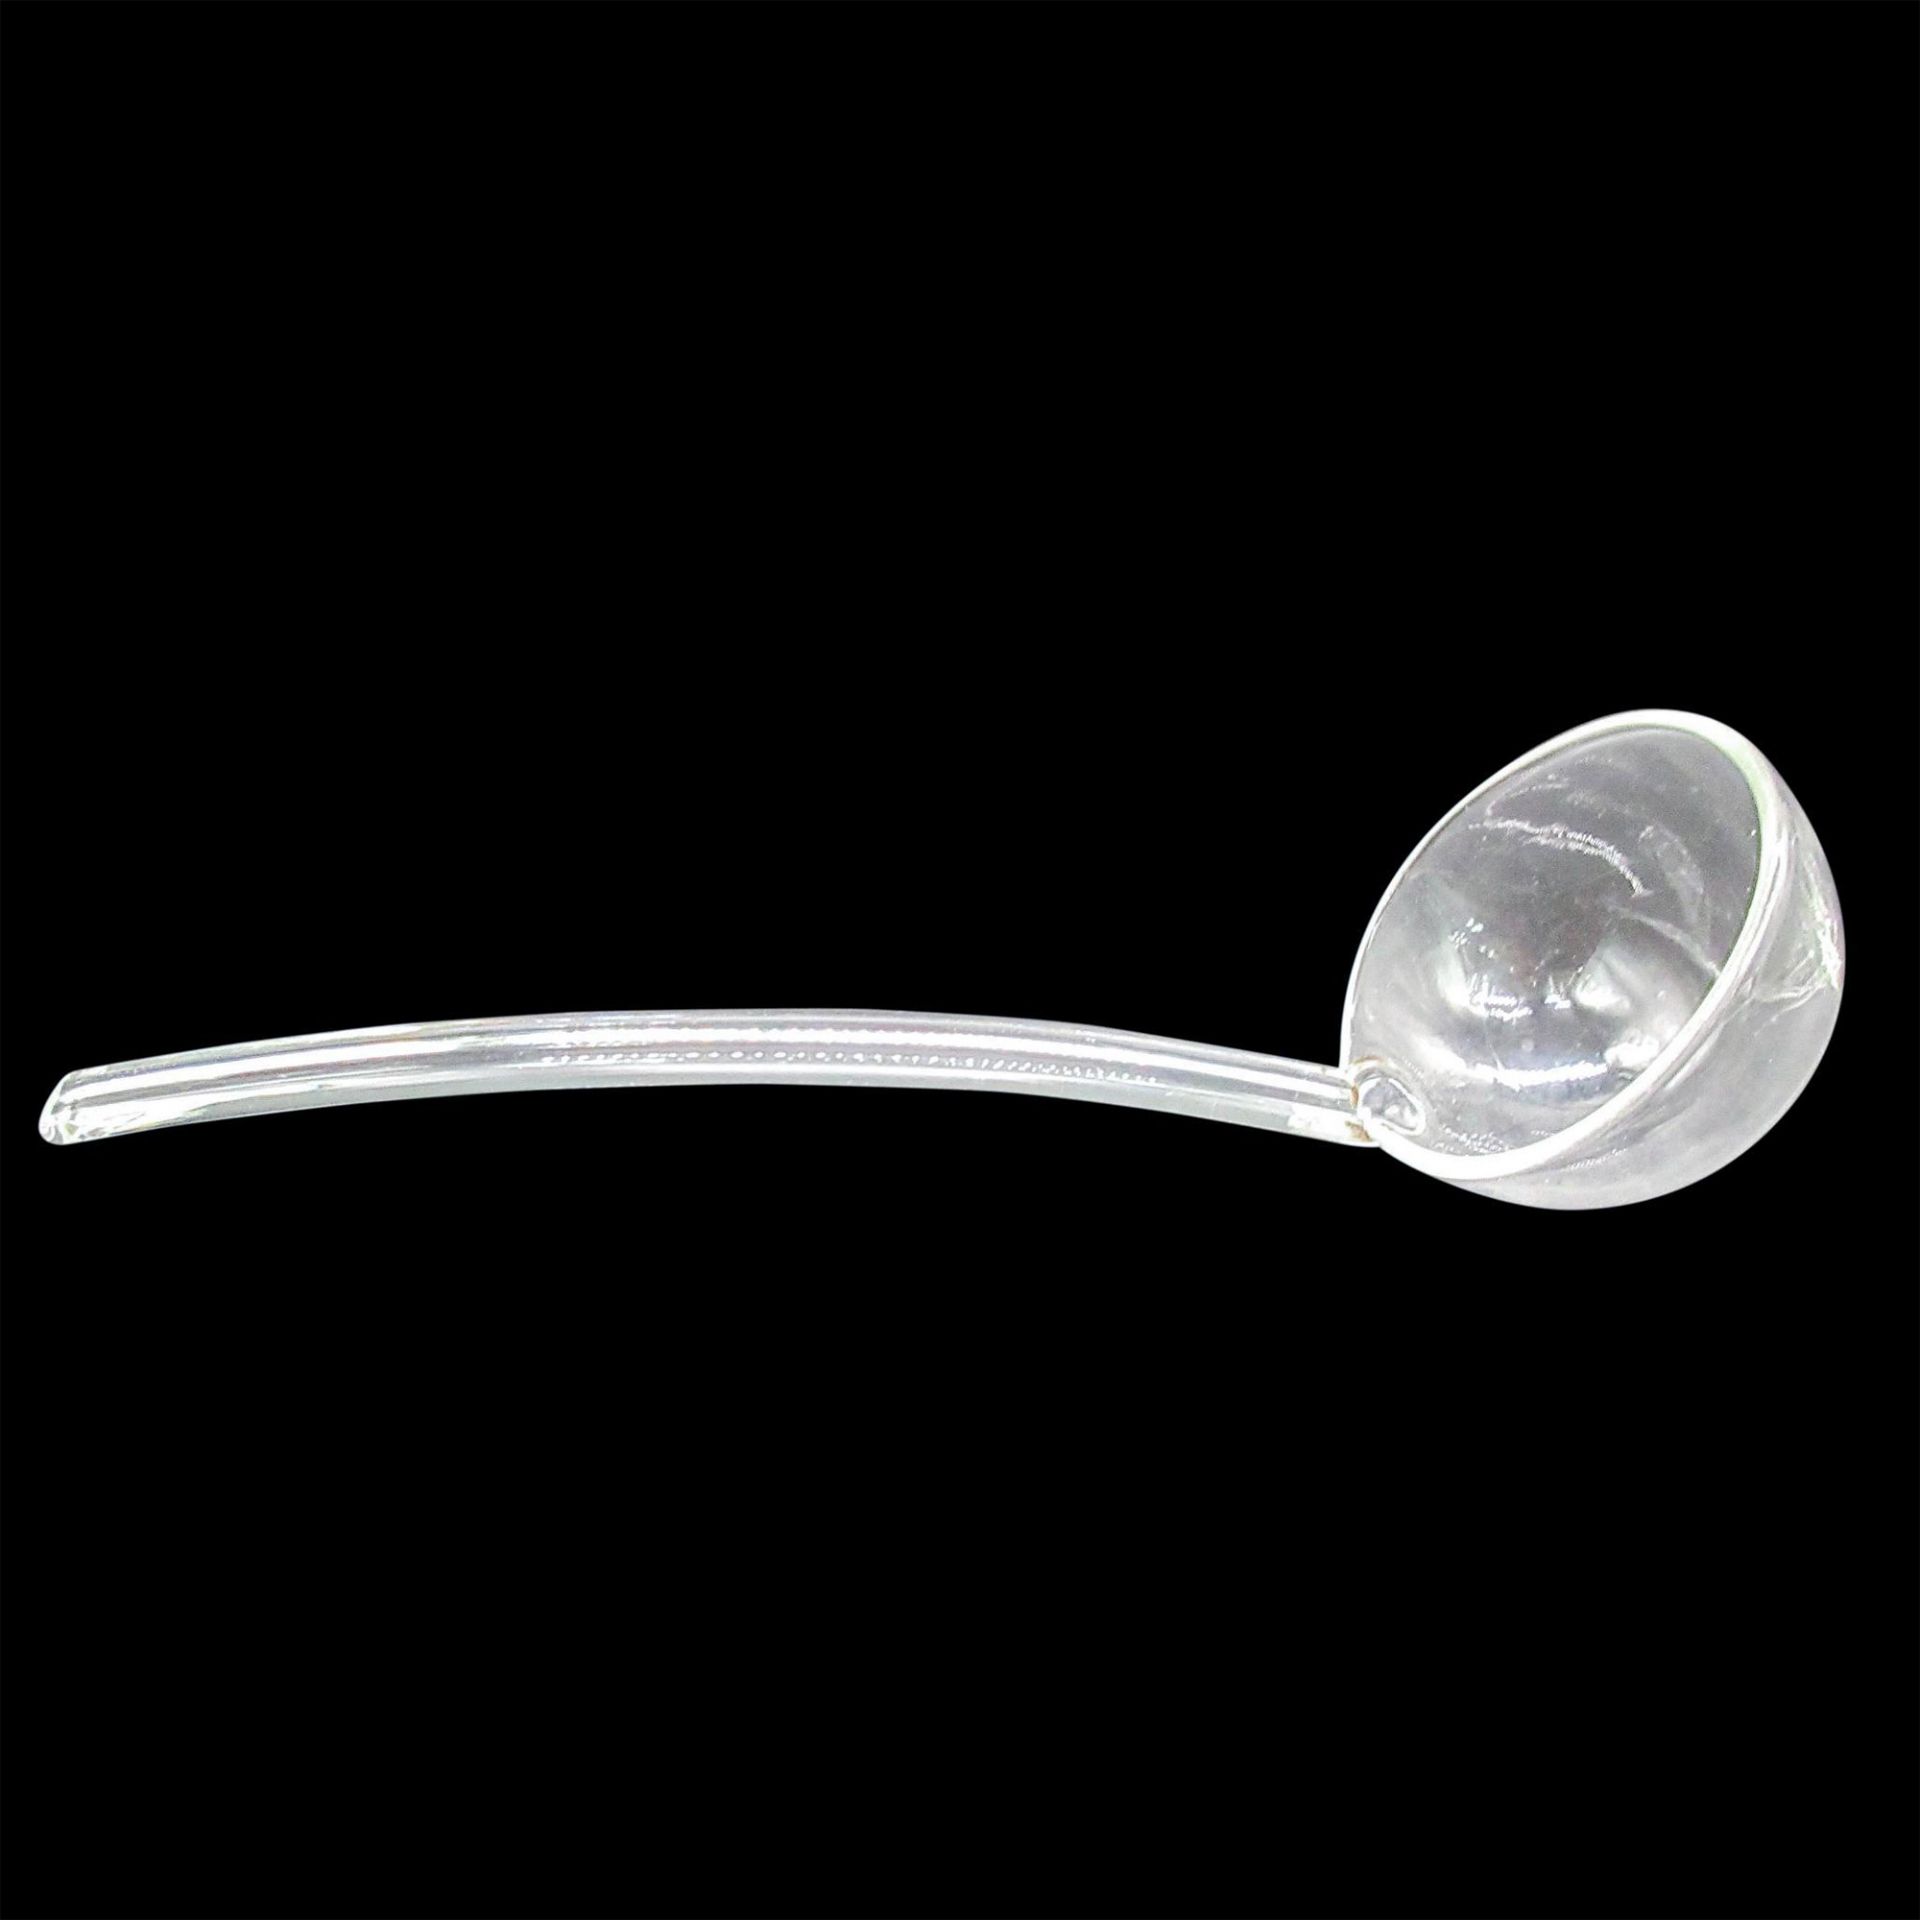 5pc Small Glass Ladles - Image 3 of 16